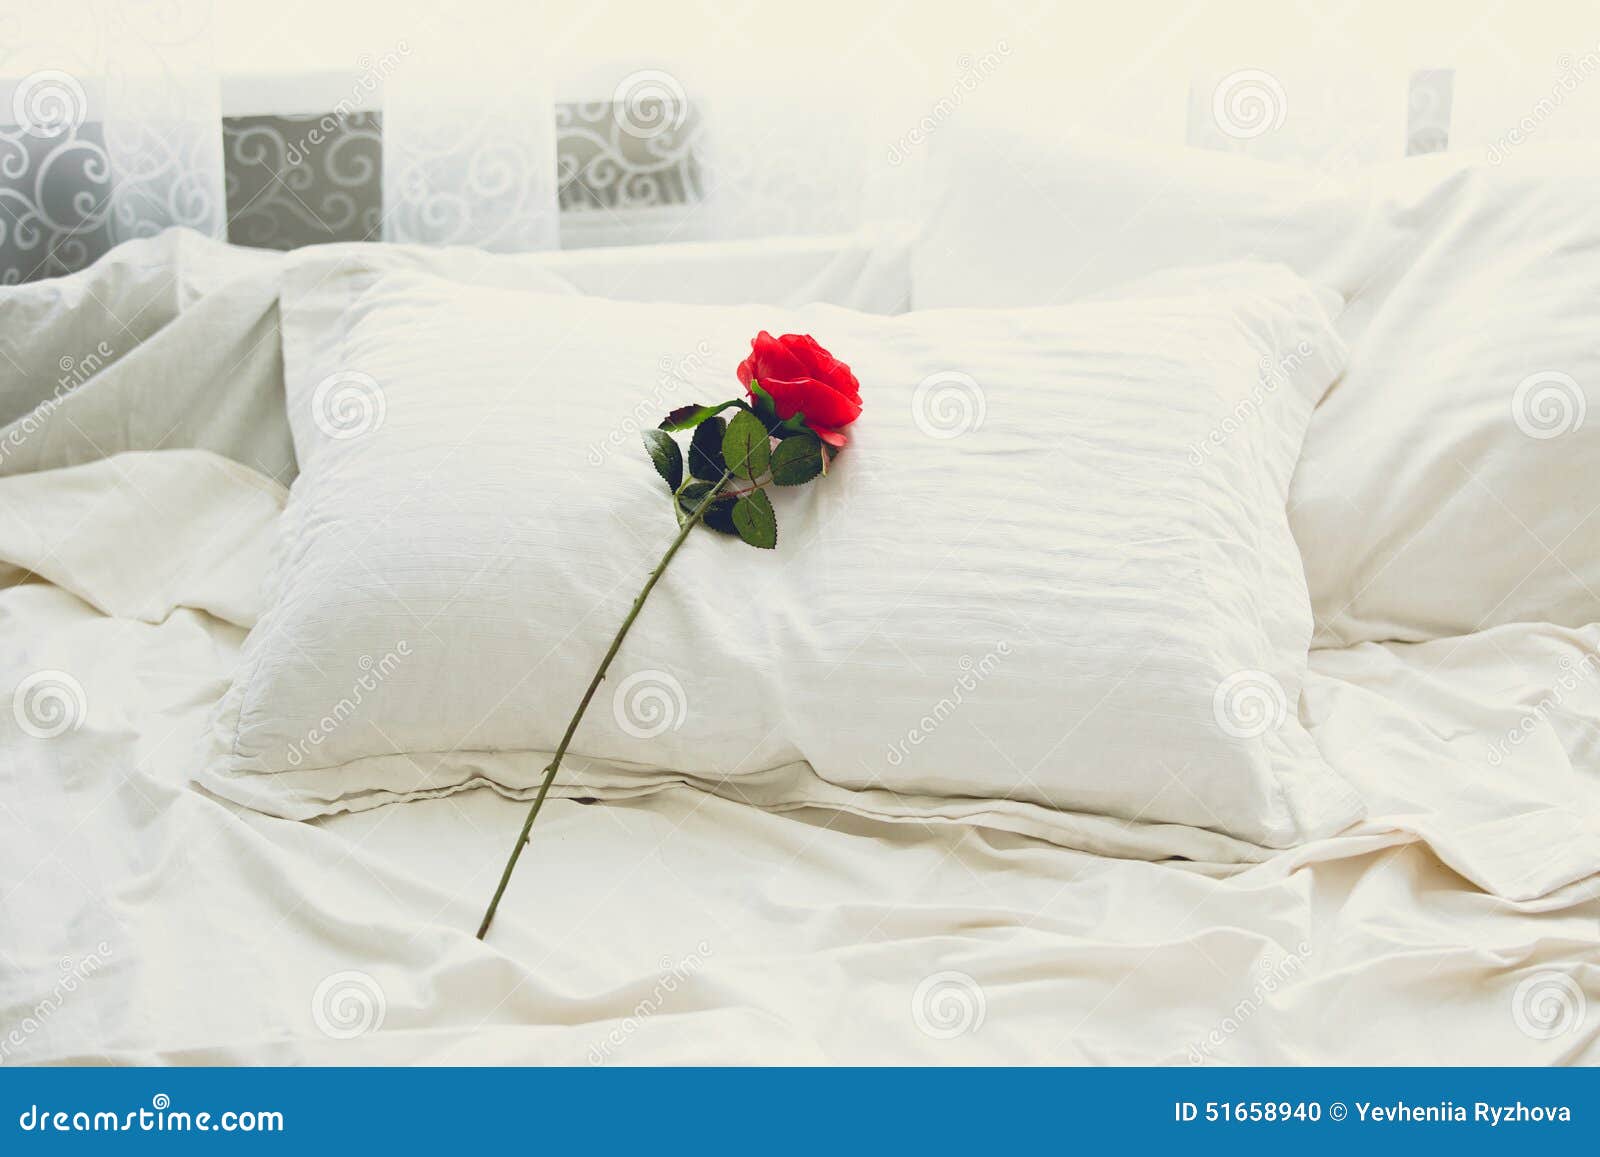 Toned Shot Of Red Rose Lying On Bed At Morning Stock Photo - Image of